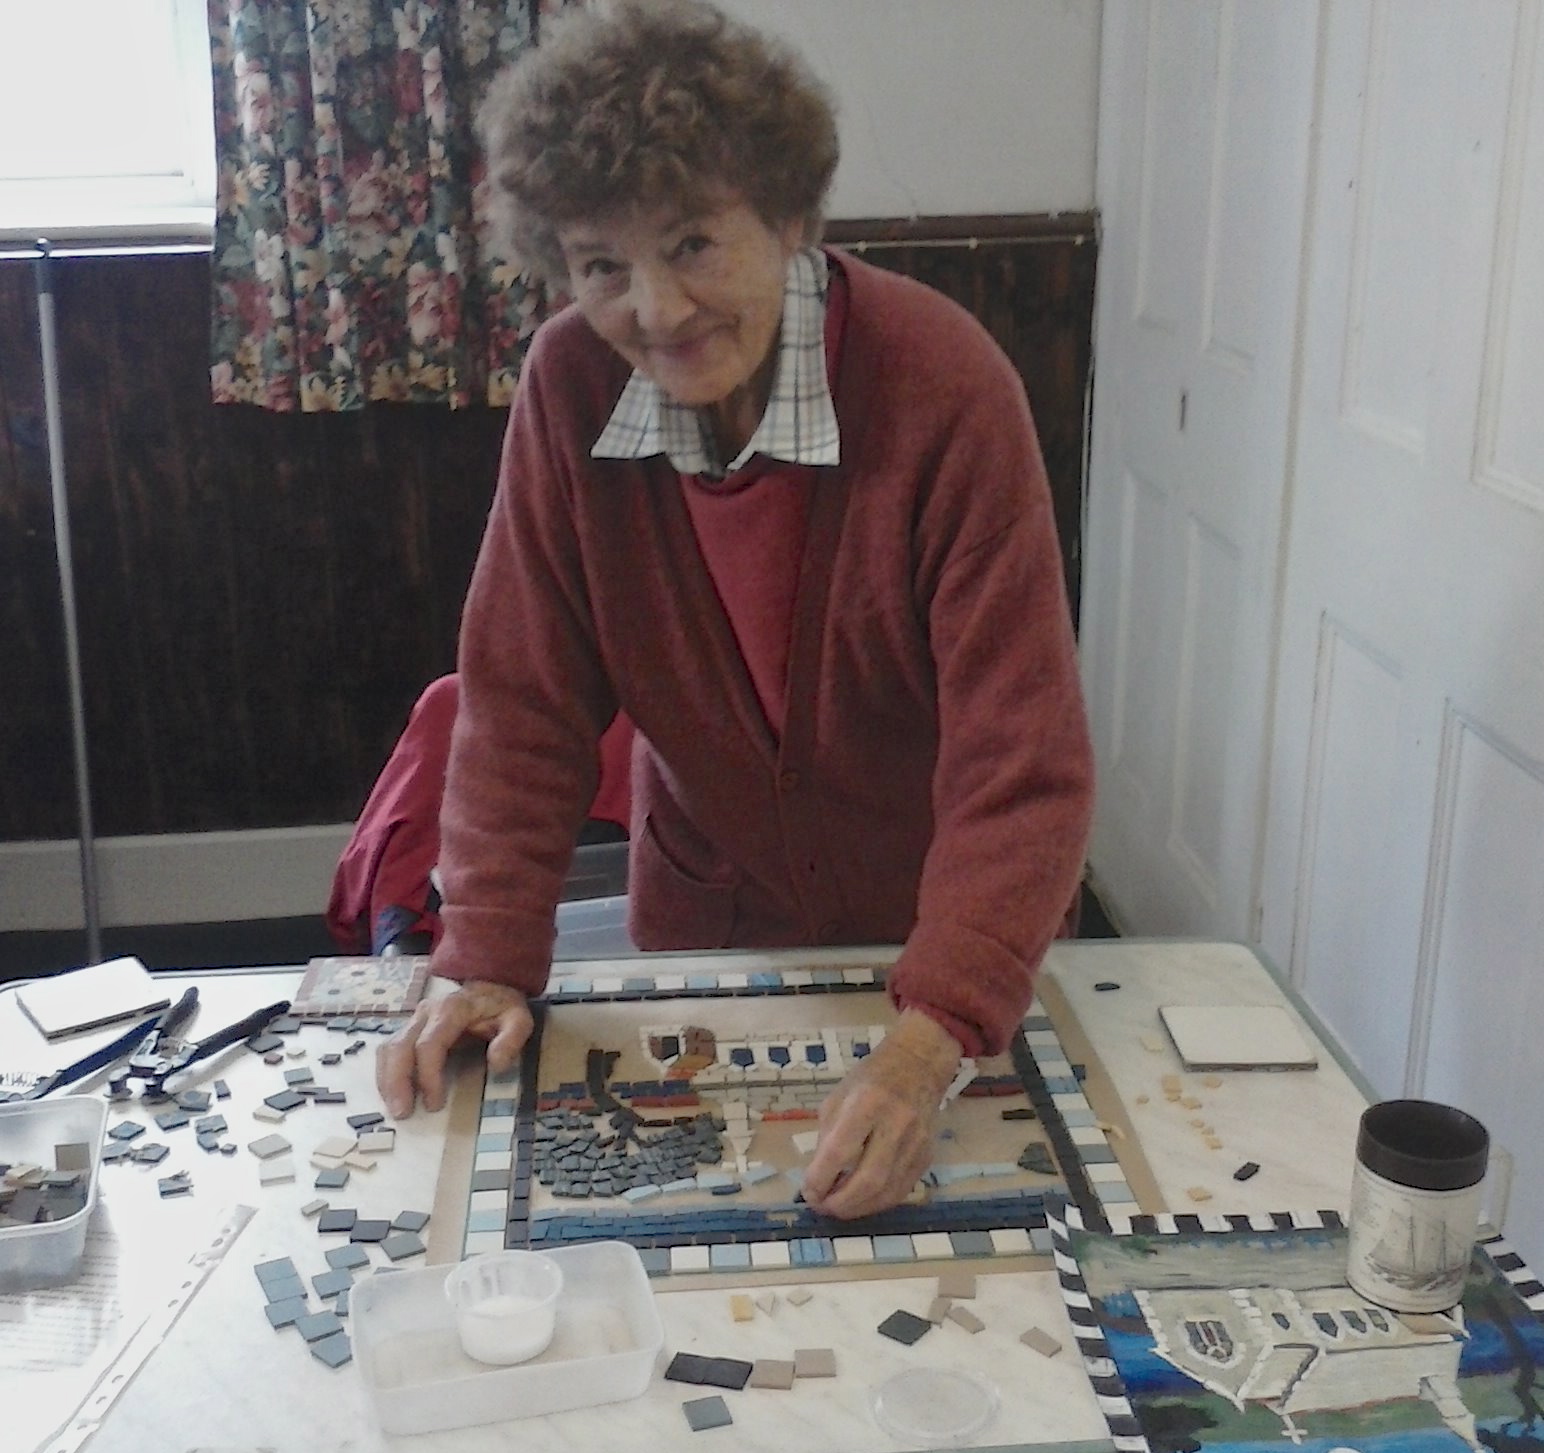 Yvonne Fuller working on the St Mawes Mosaic project